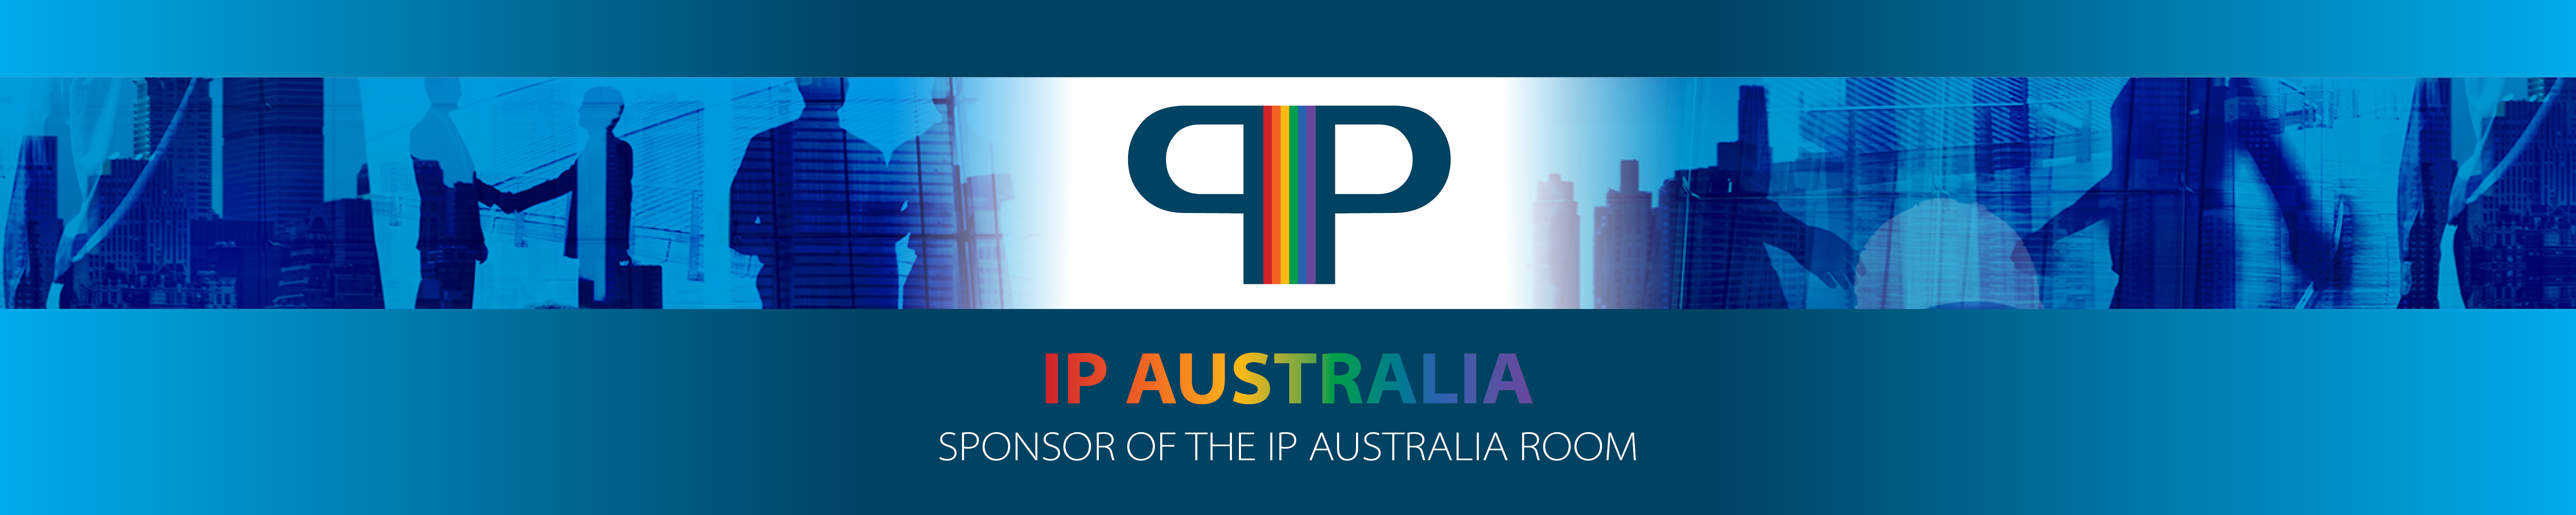 PIP_Conference_IP_Aust_RoomSponsor4